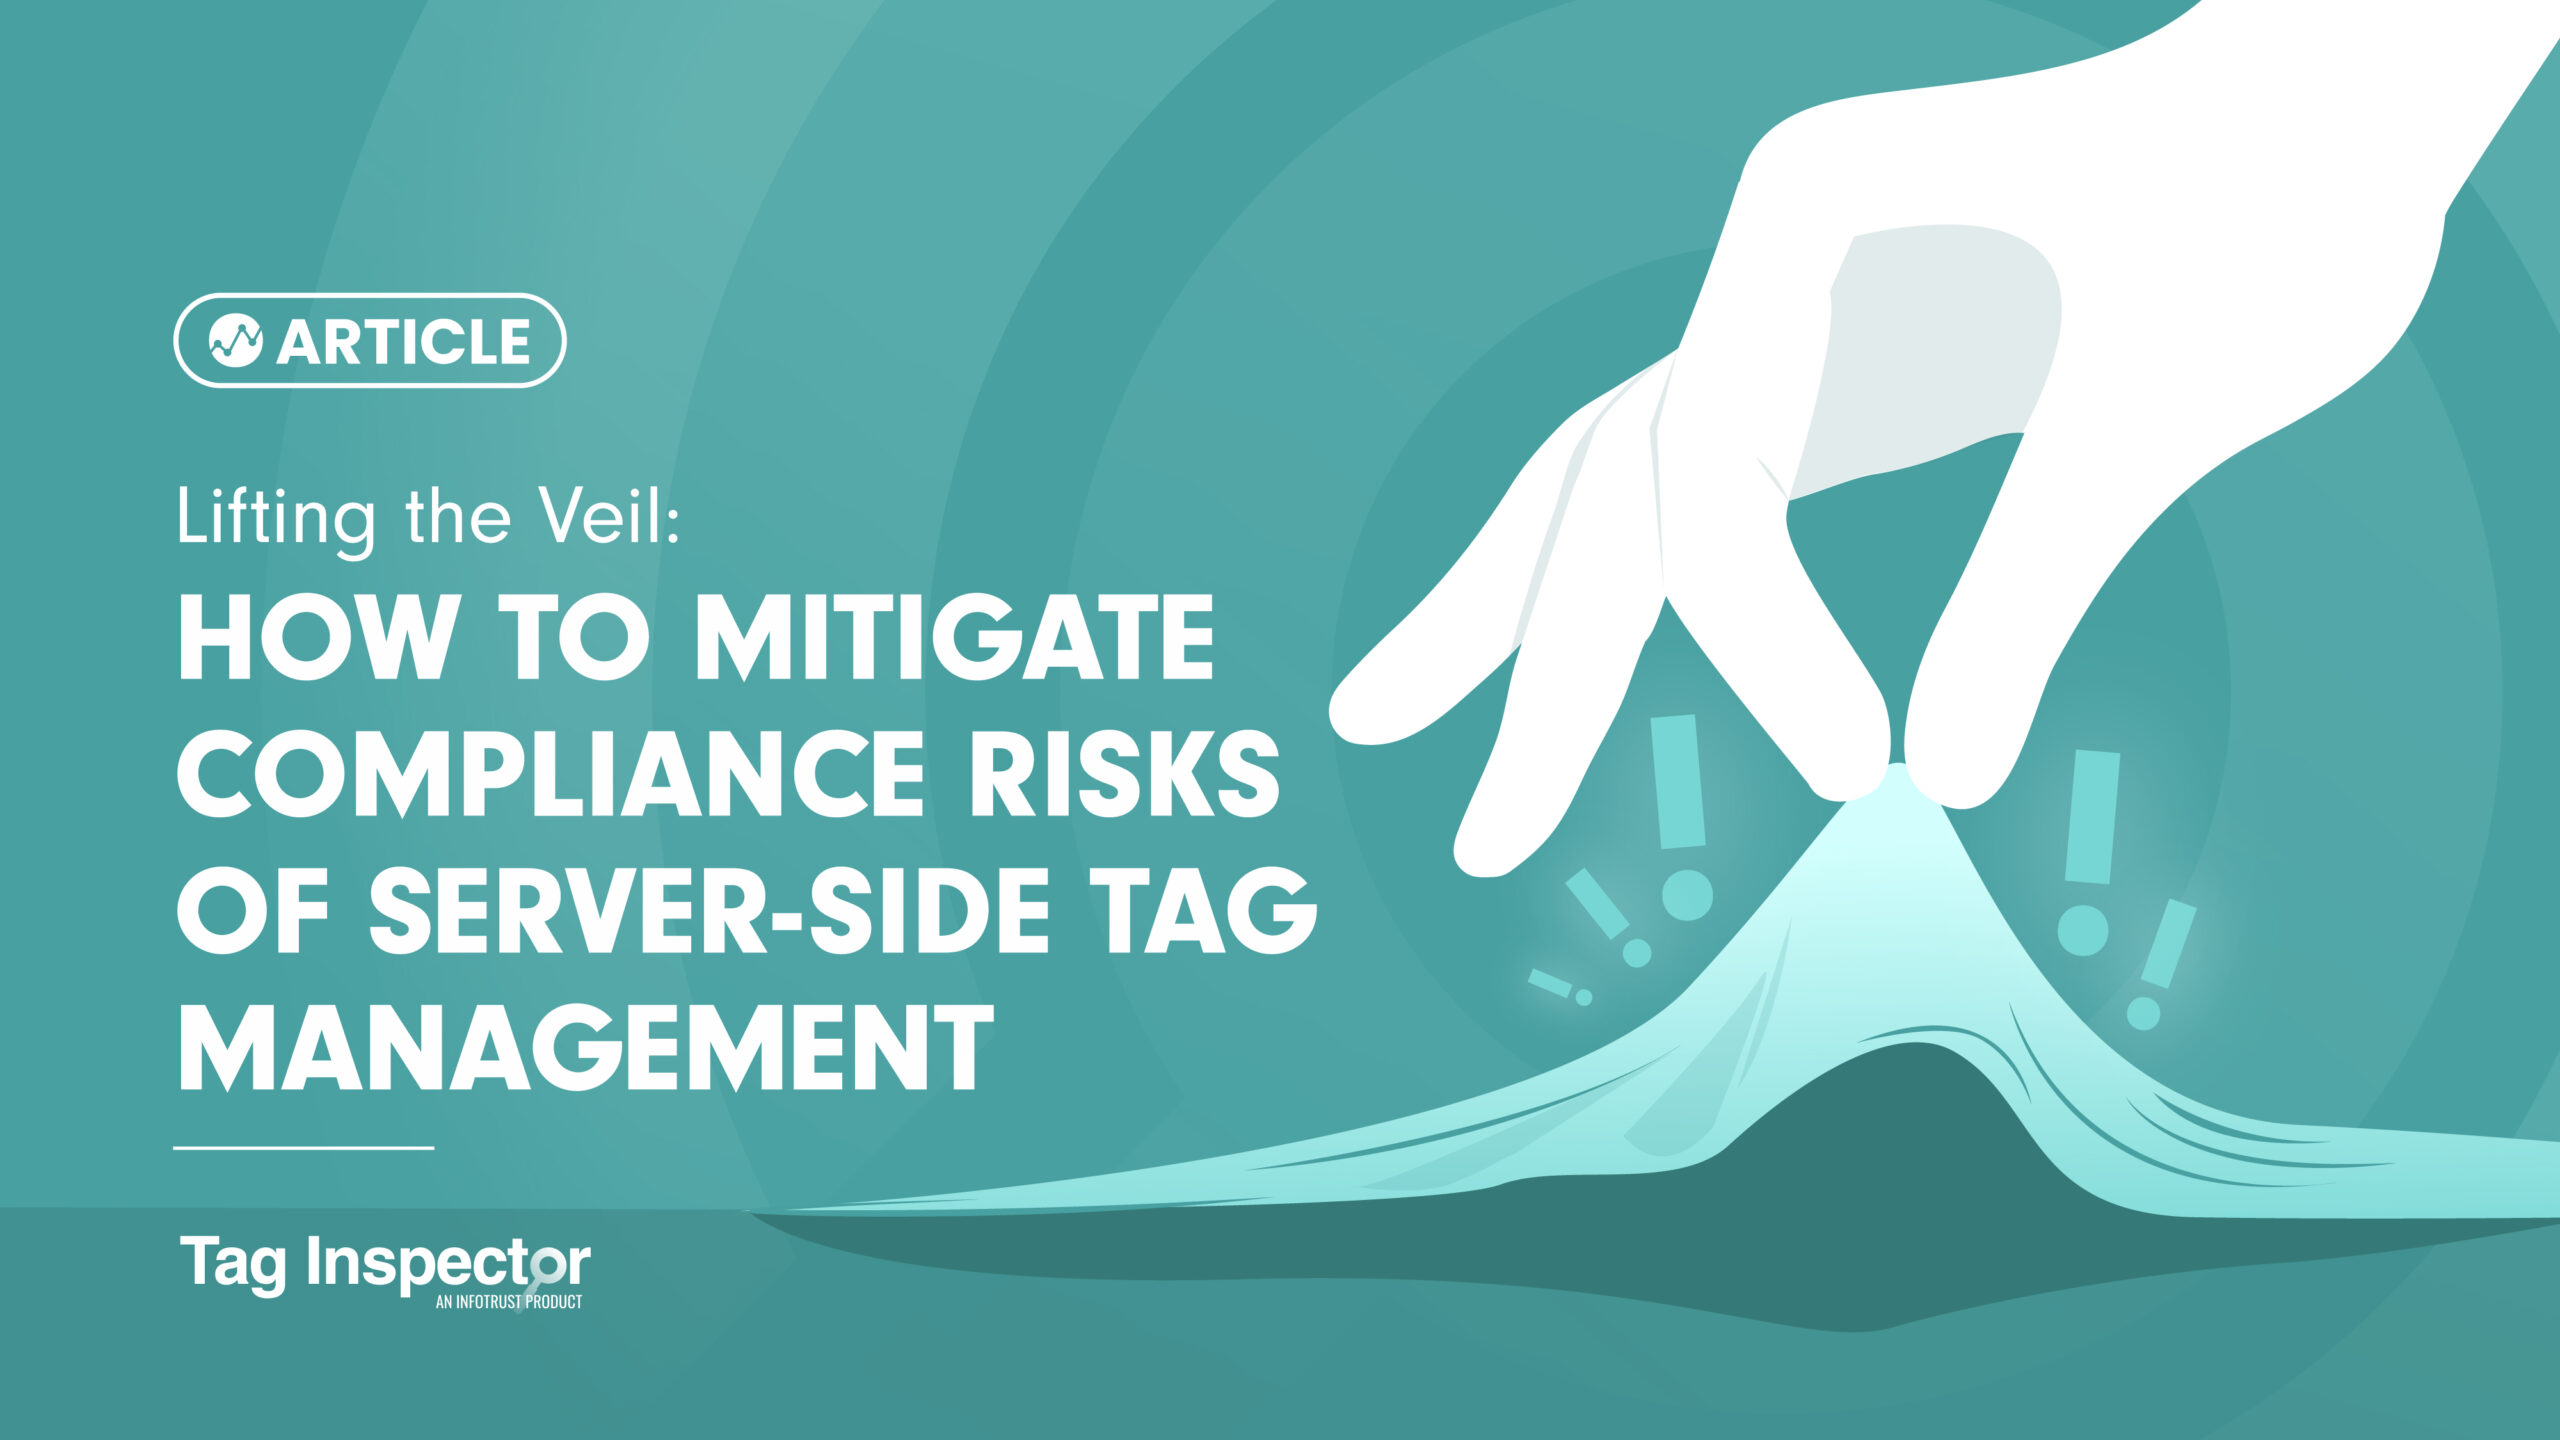 Lifting the Veil: How to Mitigate Compliance Risks of Server-side Tag Management